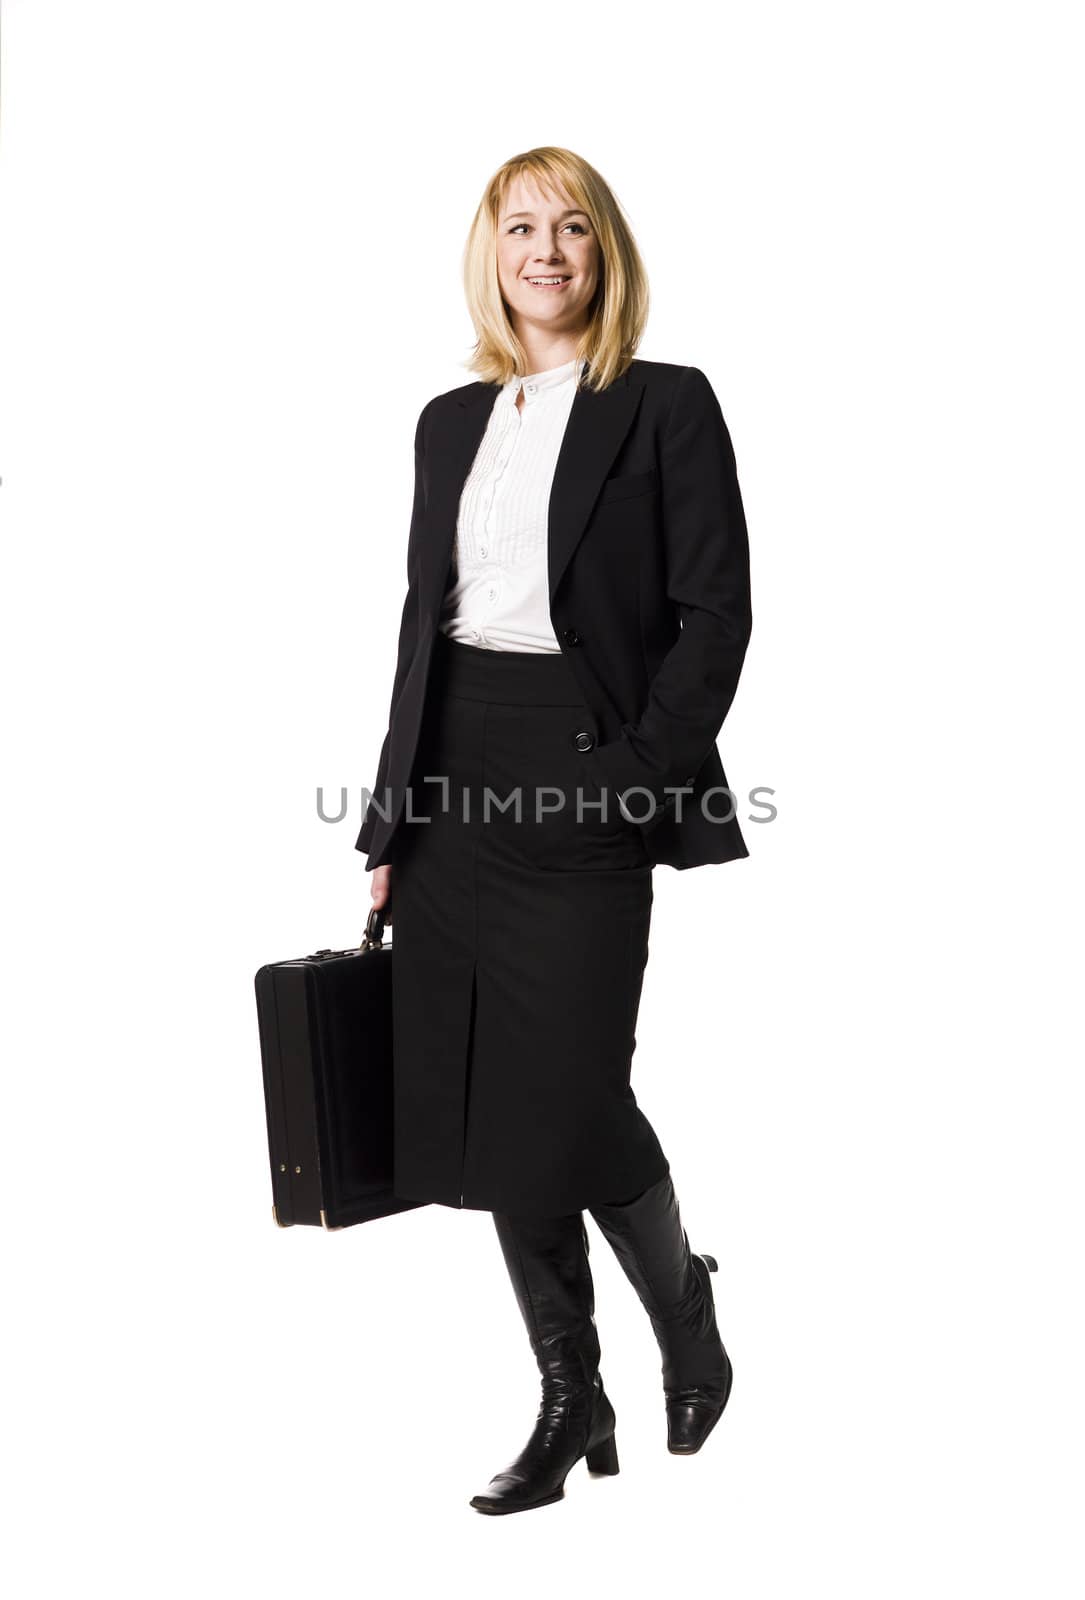 Business-woman with a briefcase